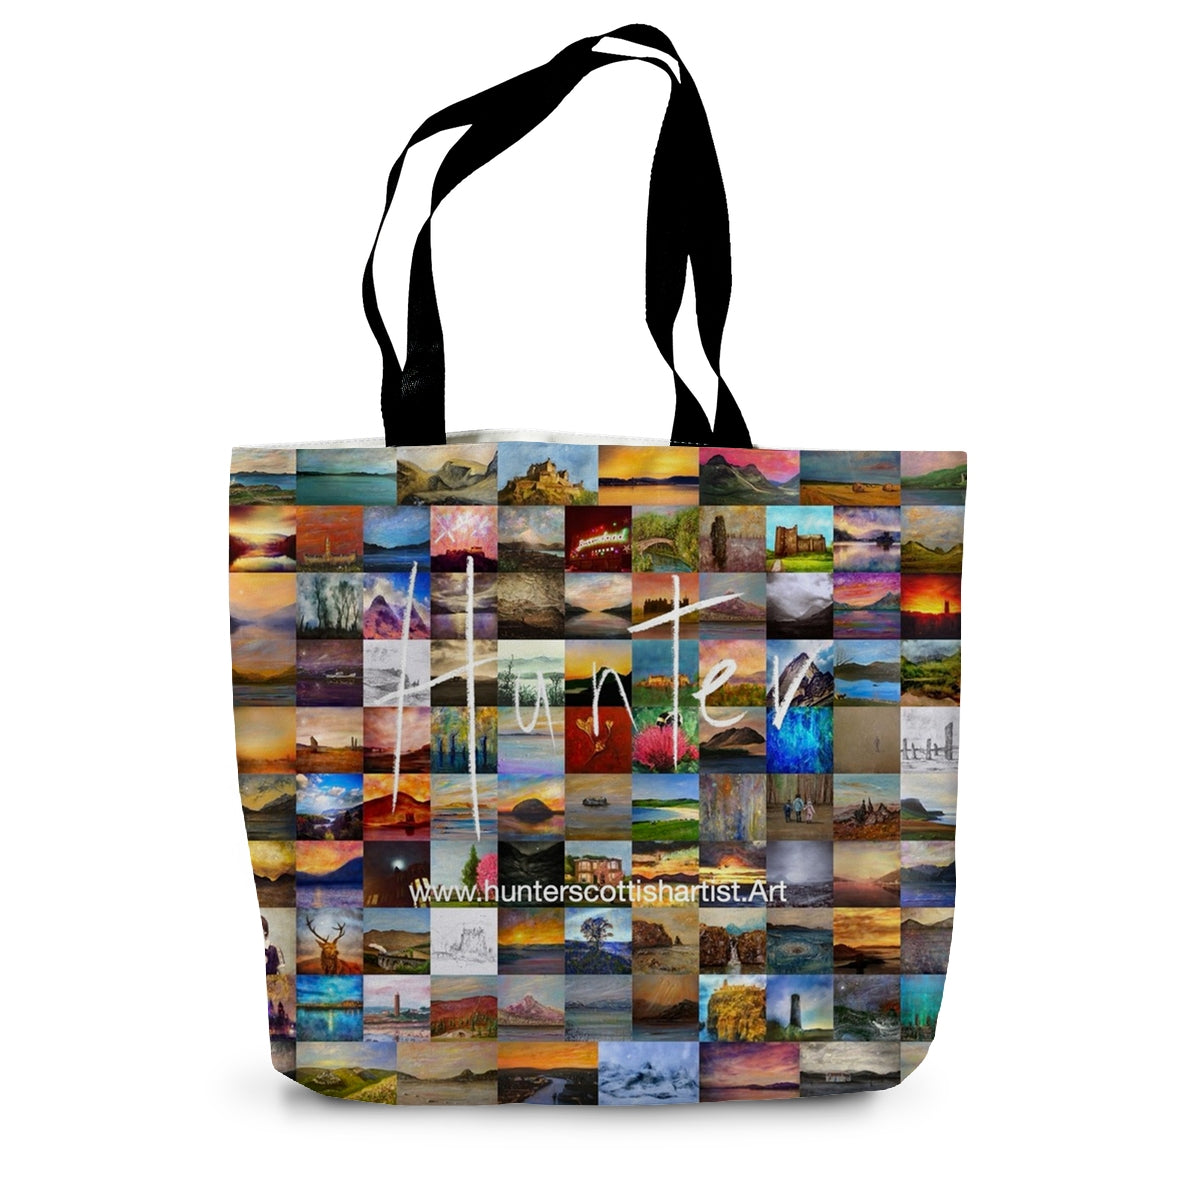 Gourock From Cardwell Bay Art Gifts Canvas Tote Bag-Bags-River Clyde Art Gallery-14"x18.5"-Paintings, Prints, Homeware, Art Gifts From Scotland By Scottish Artist Kevin Hunter